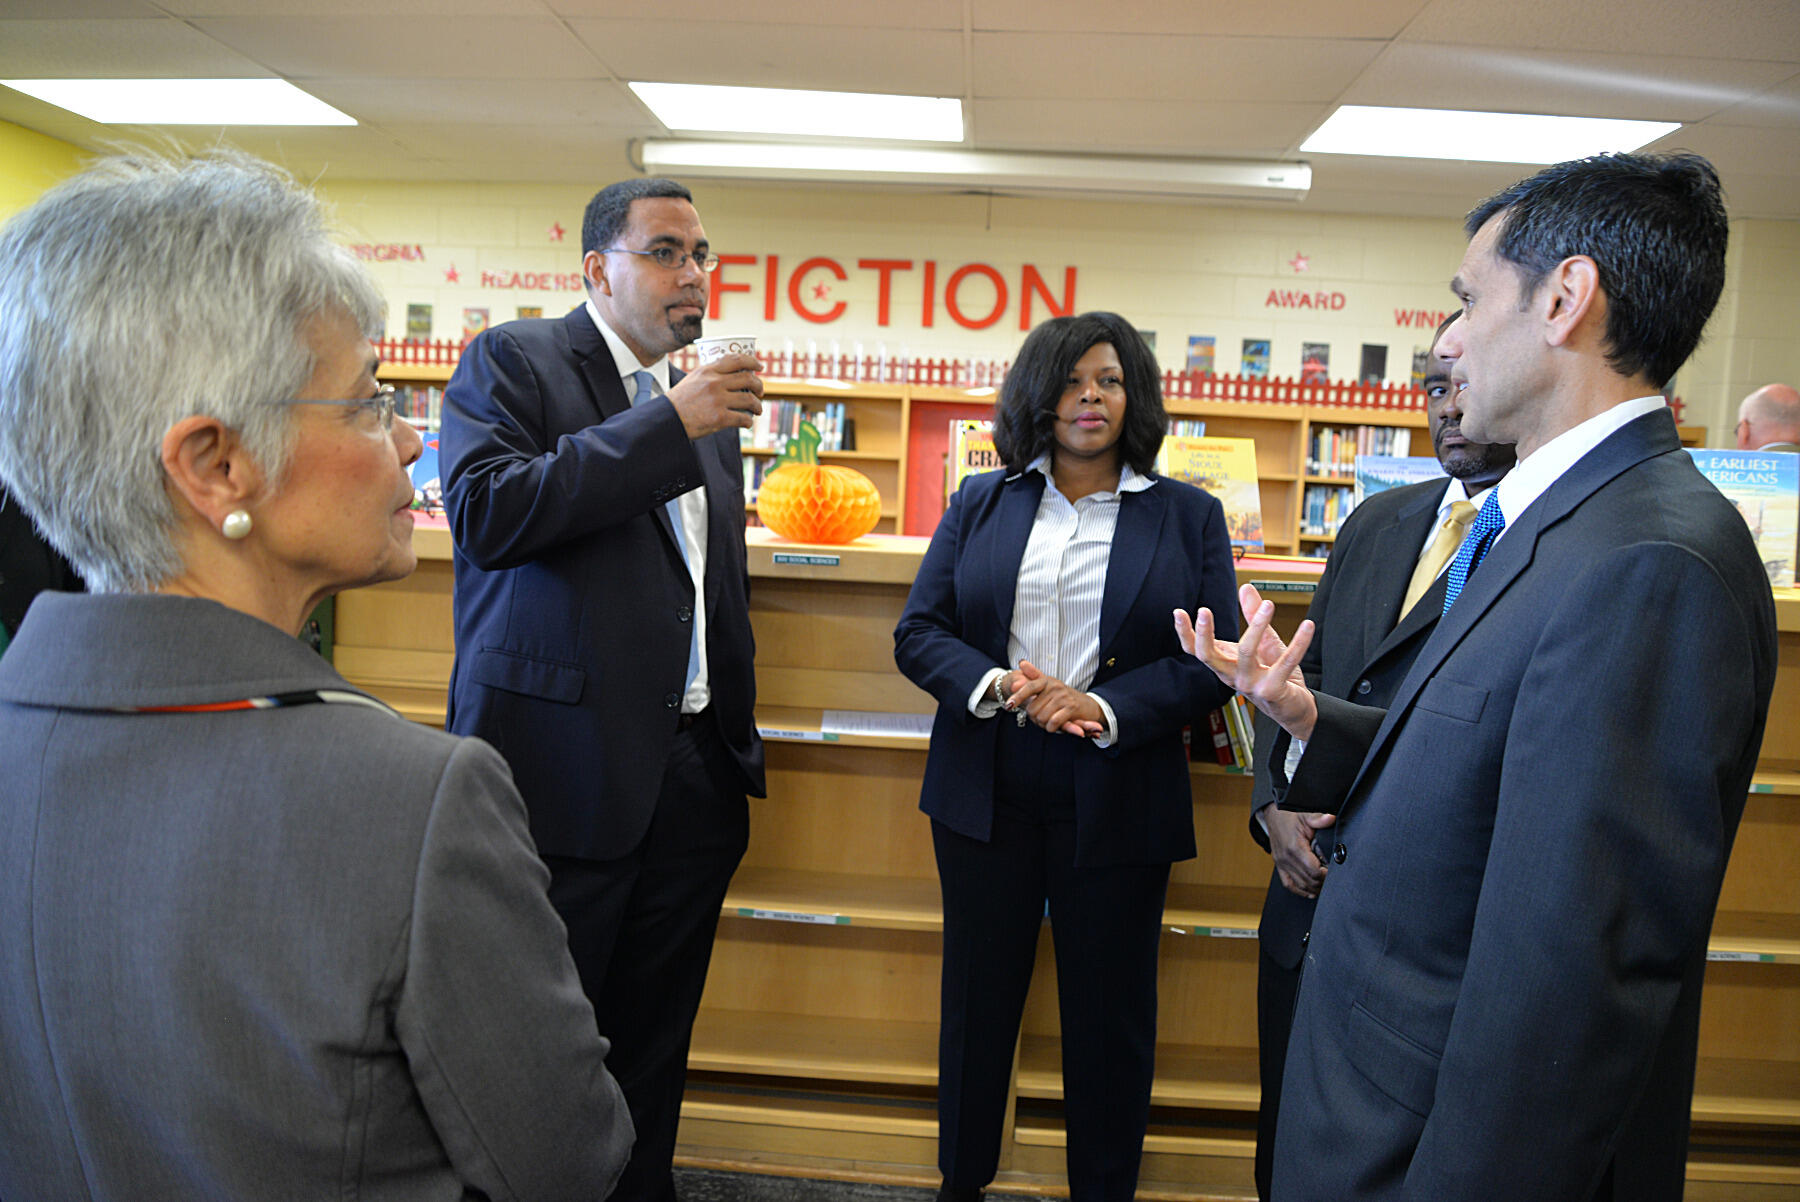 VCU President Michael Rao, Ph.D., (right) speaks with (from left) Therese A. Dozier, Ed.D., director of the Richmond Teacher Residency program; U.S. Secretary of Education John B. King Jr.; Elkhardt-Thompson Middle School Principal Jacquelyn Murphy, Ed.D.; and VCU School of Education Dean Andrew P. Daire, Ph.D.